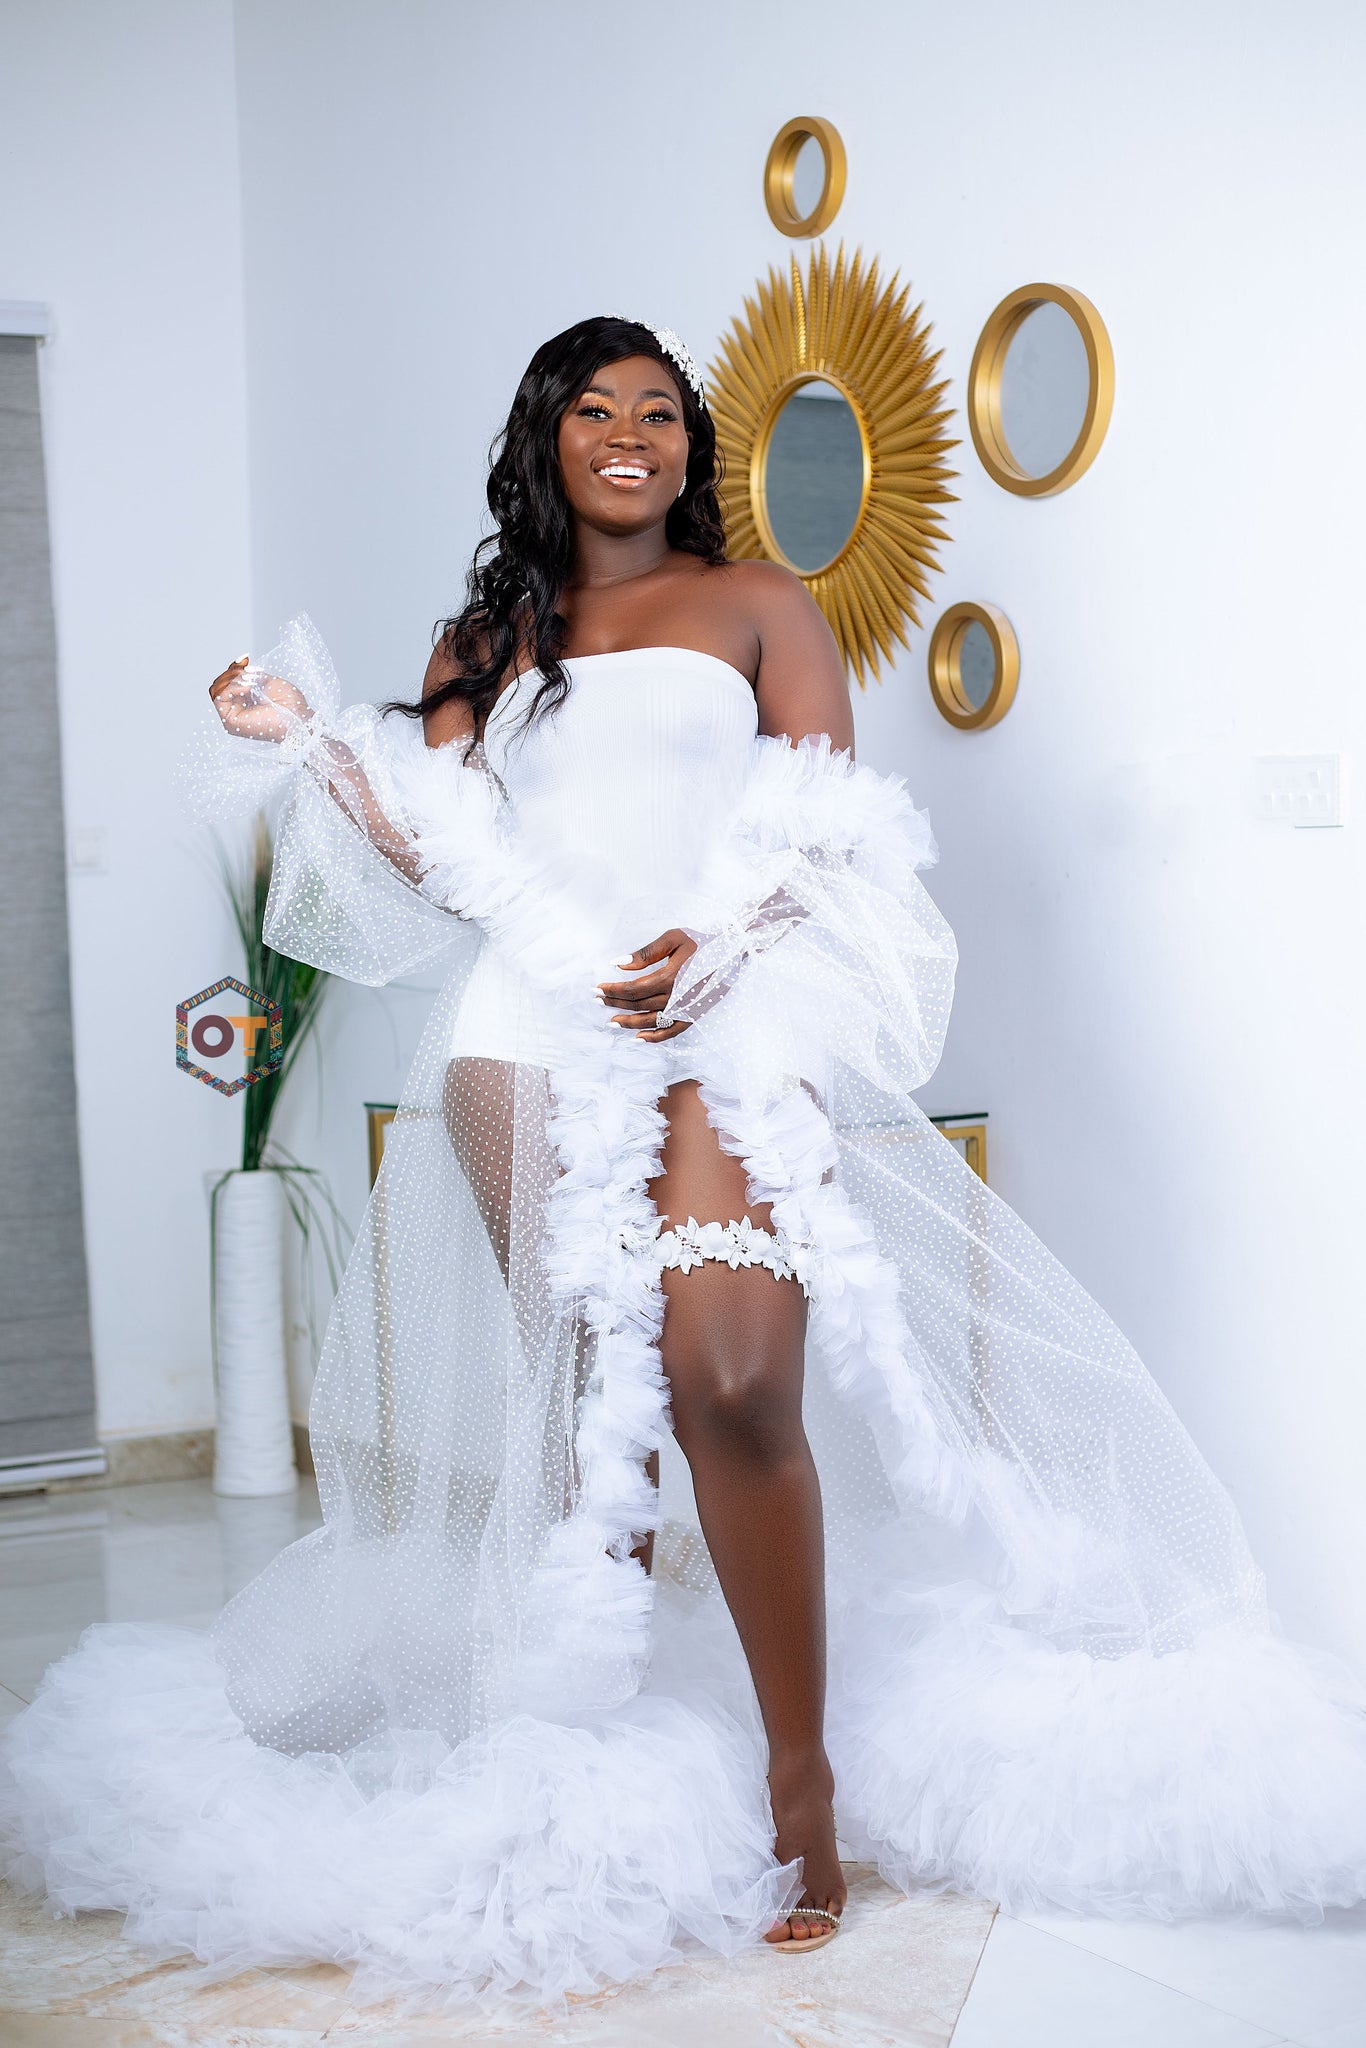 Bridal Party Photos with Customized Color Schemed Outfits